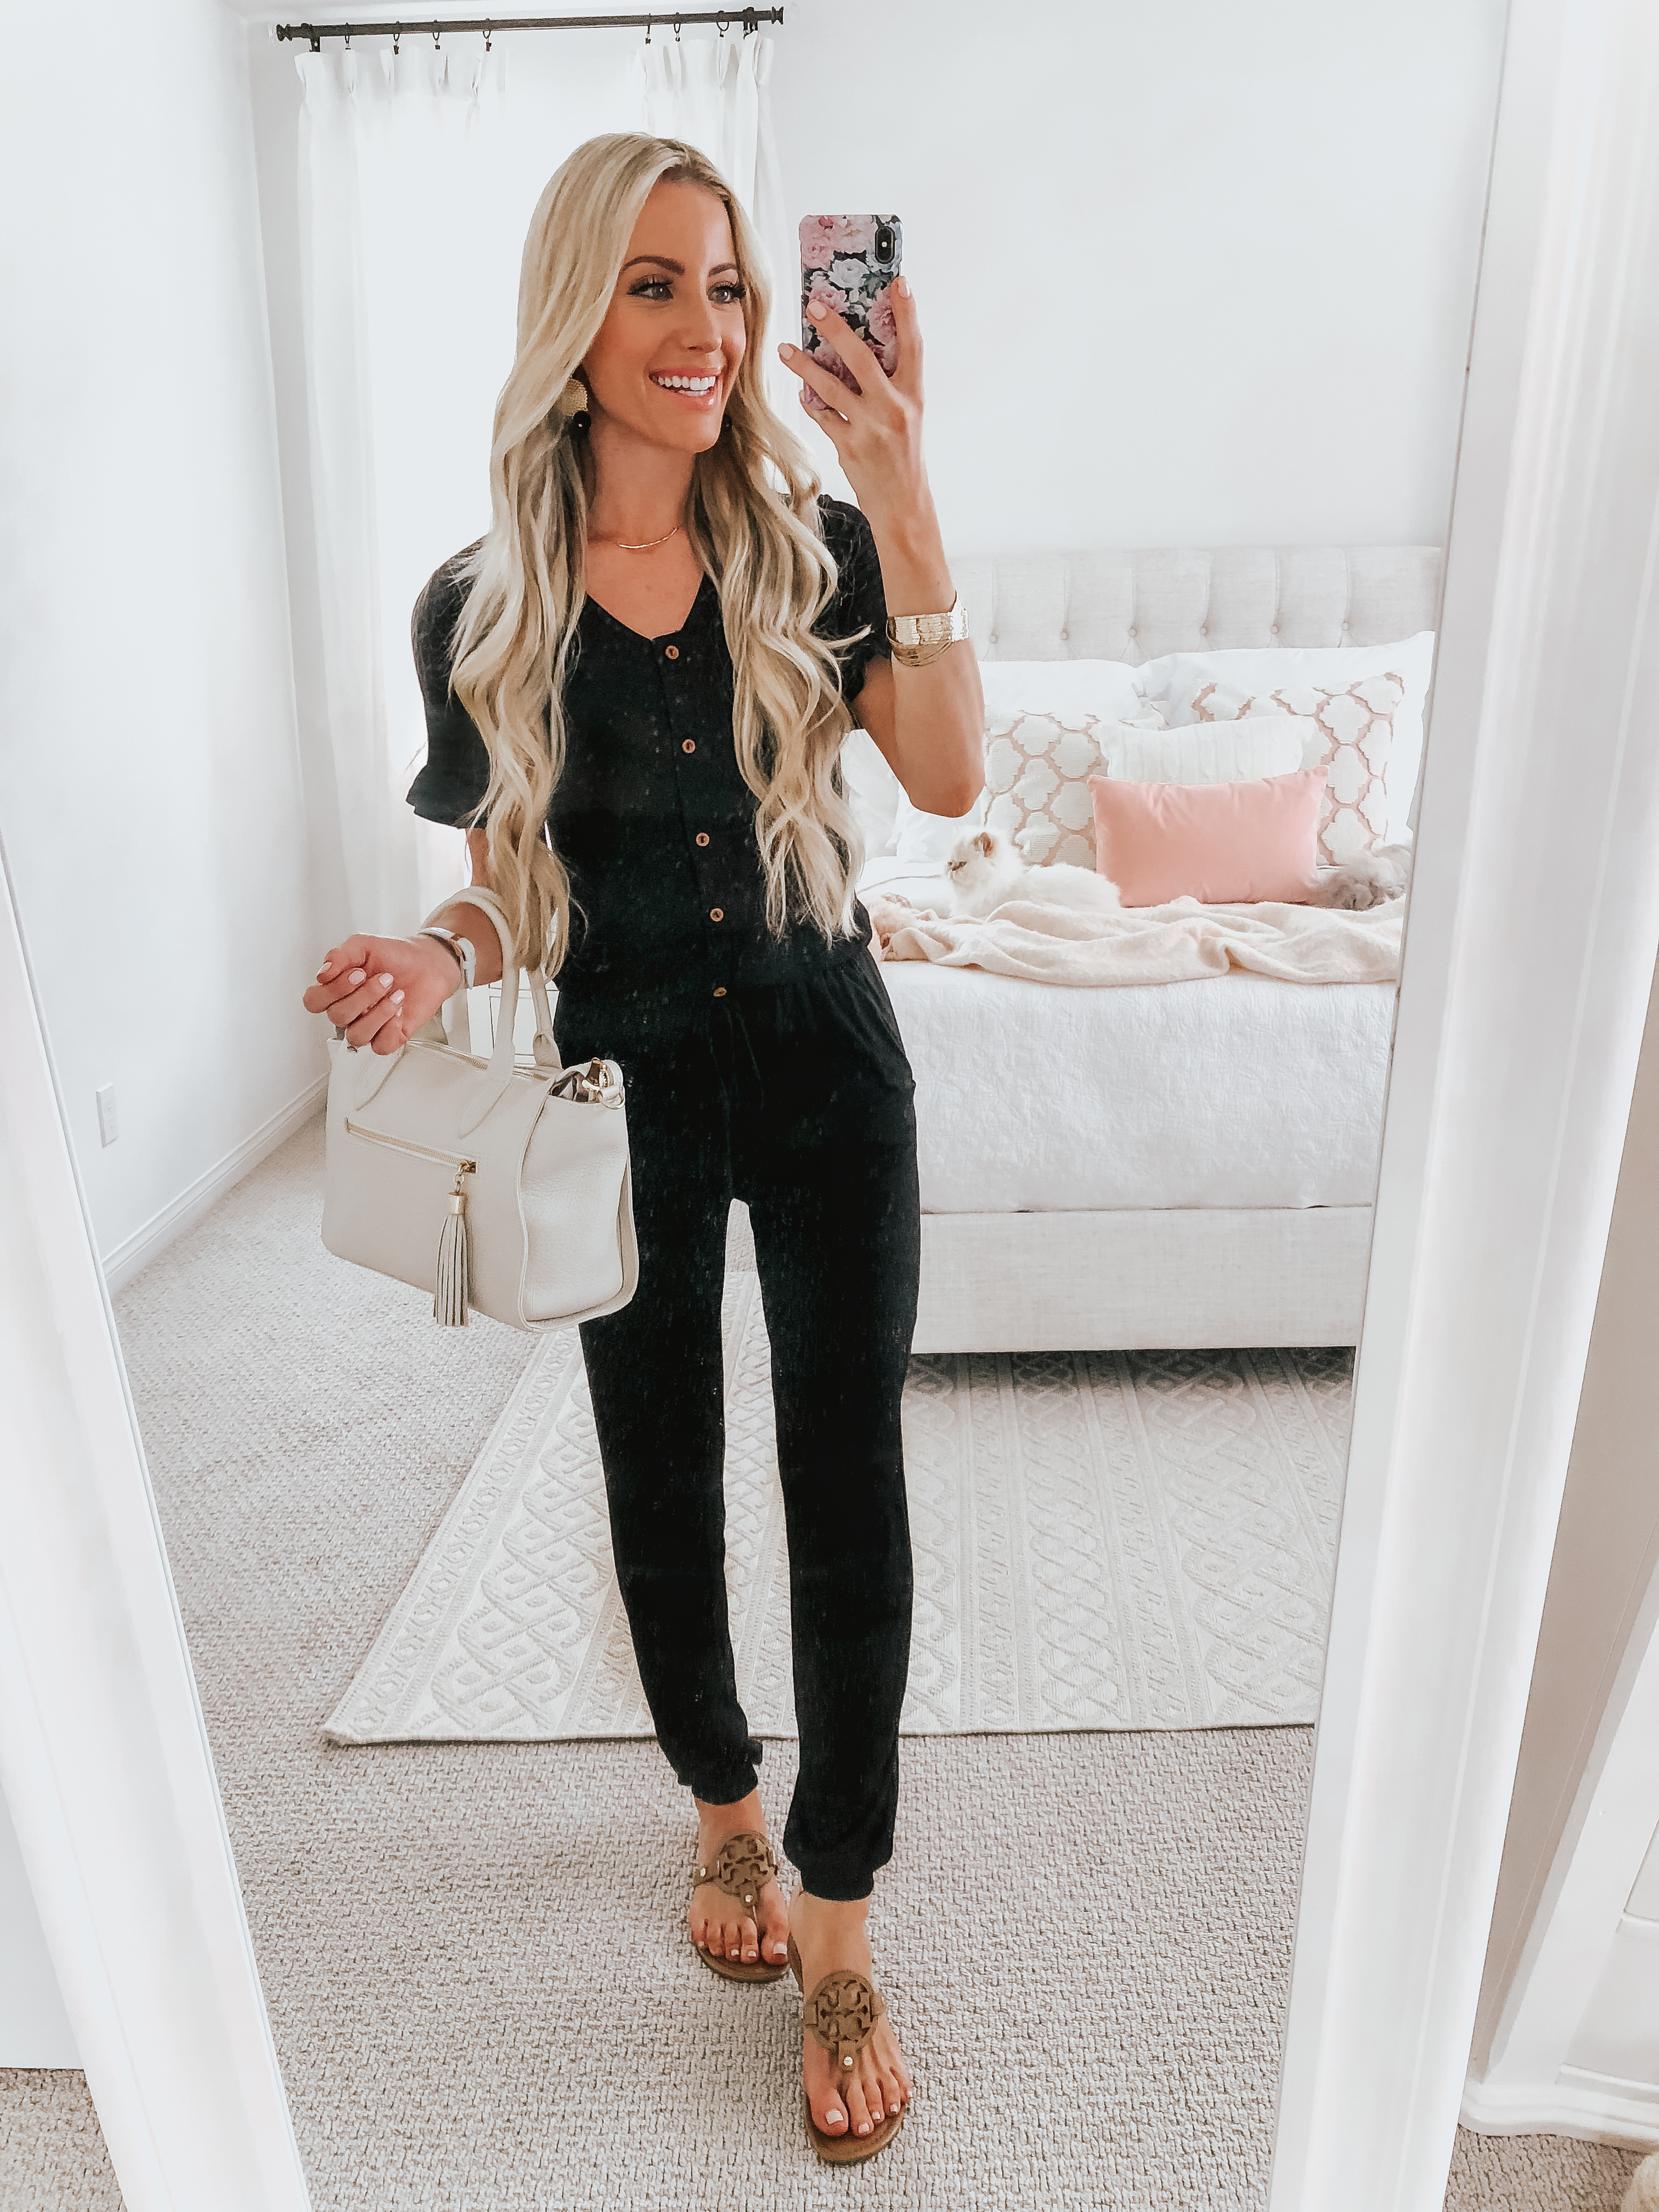 Lifestyle Blogger Katelyn Jones of A Touch of Pink Blog shares her Brickyard Buffalo Guest Editor Picks